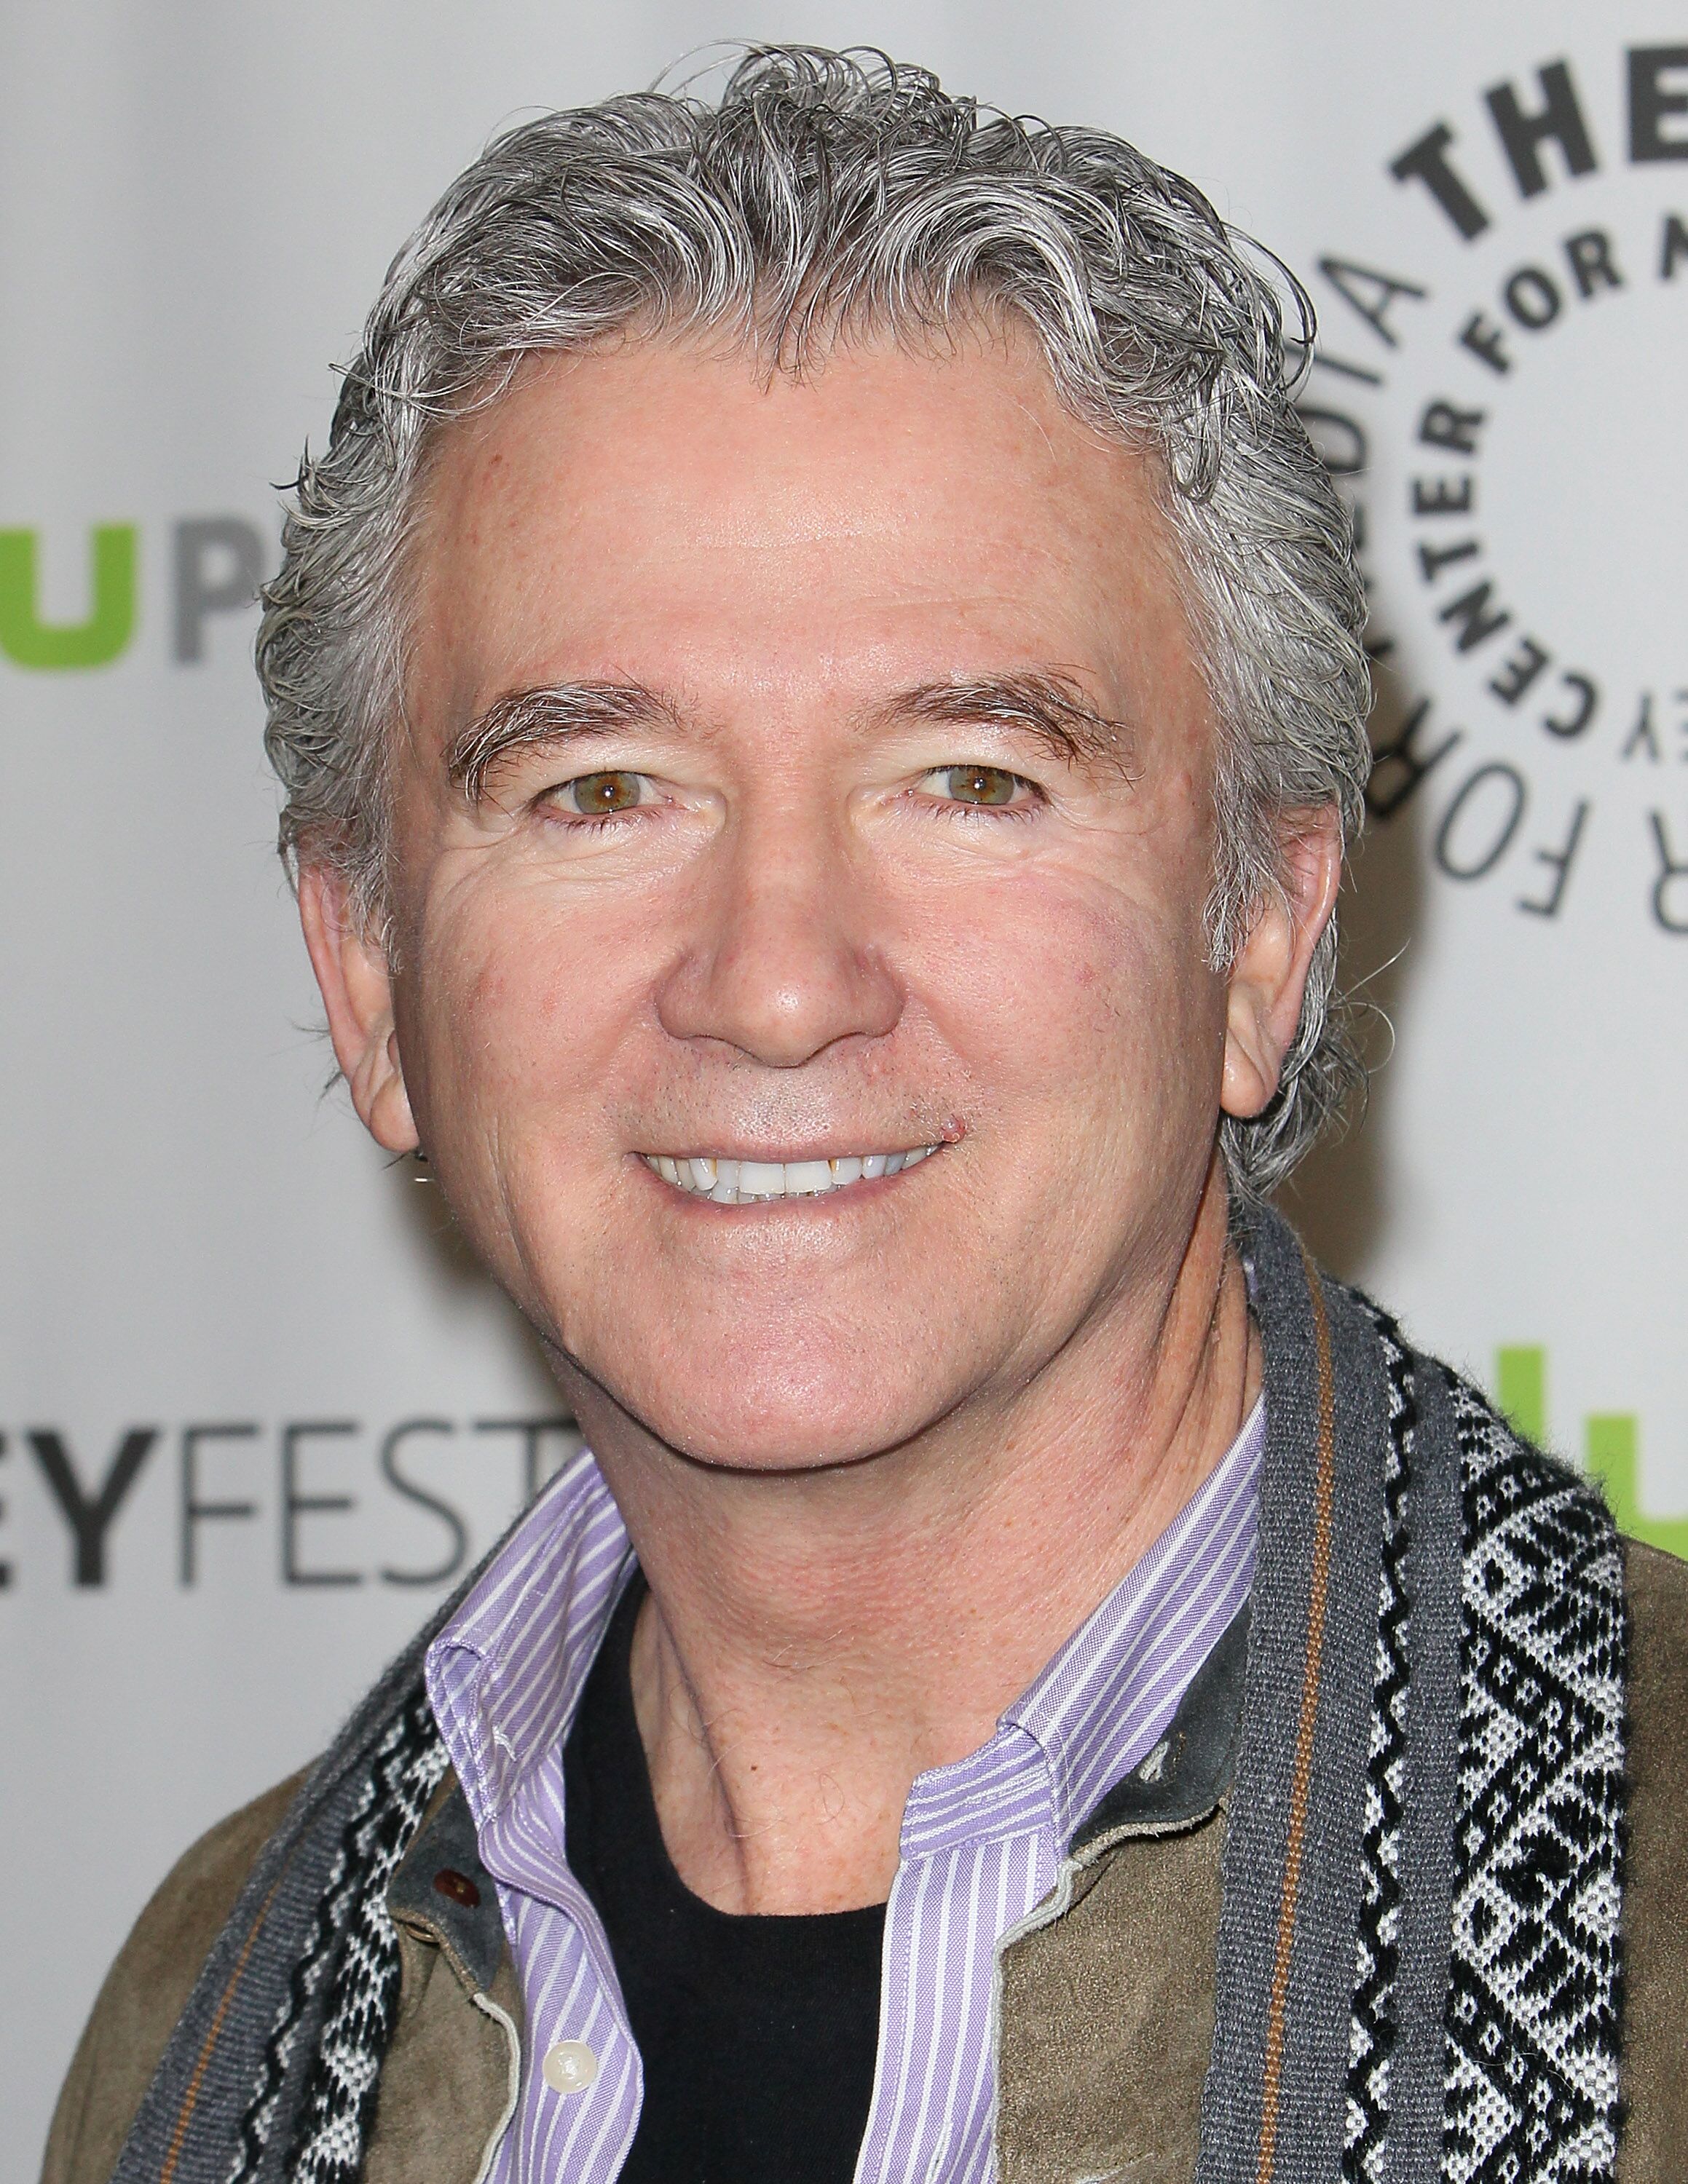 Patrick Duffy attends The Paley Center For Media's PaleyFest 2013 honoring "Dallas." | Source: Getty Images 